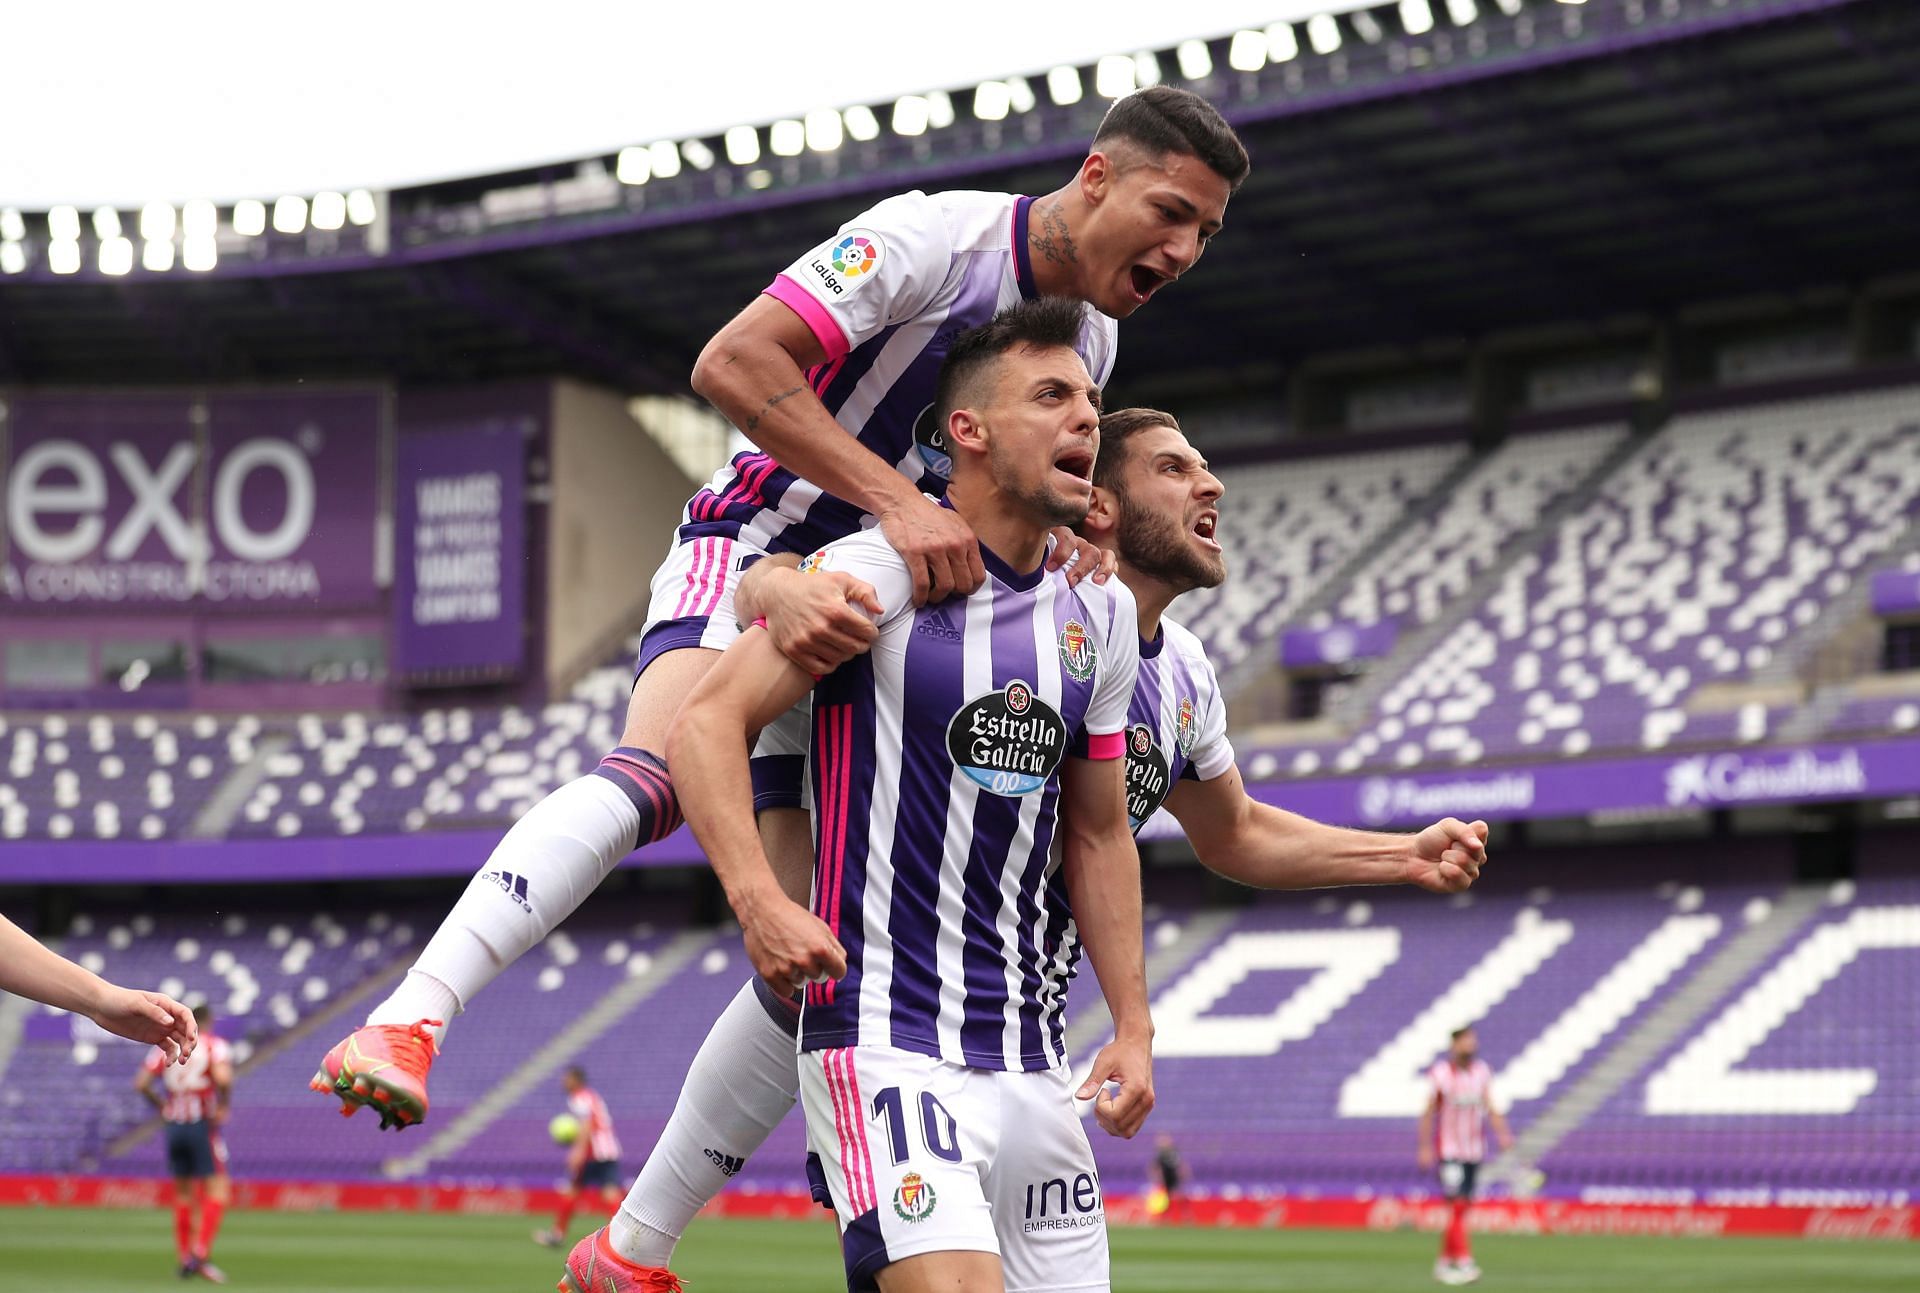 Real Valladolid are looking to go to second in the table with a win over Lugo on Saturday